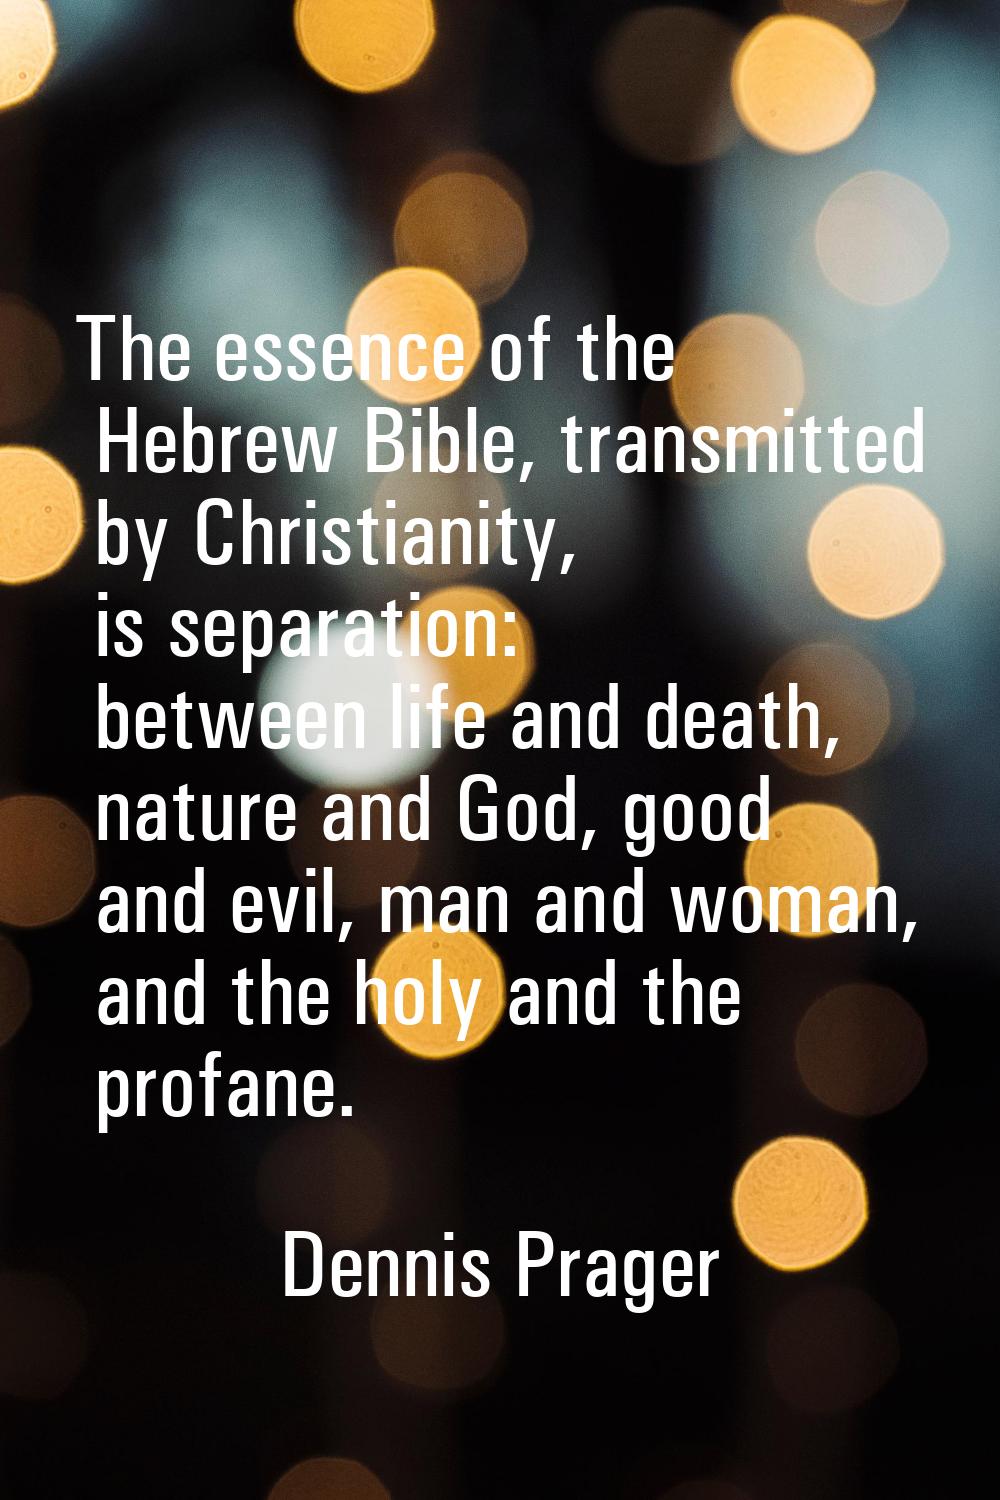 The essence of the Hebrew Bible, transmitted by Christianity, is separation: between life and death